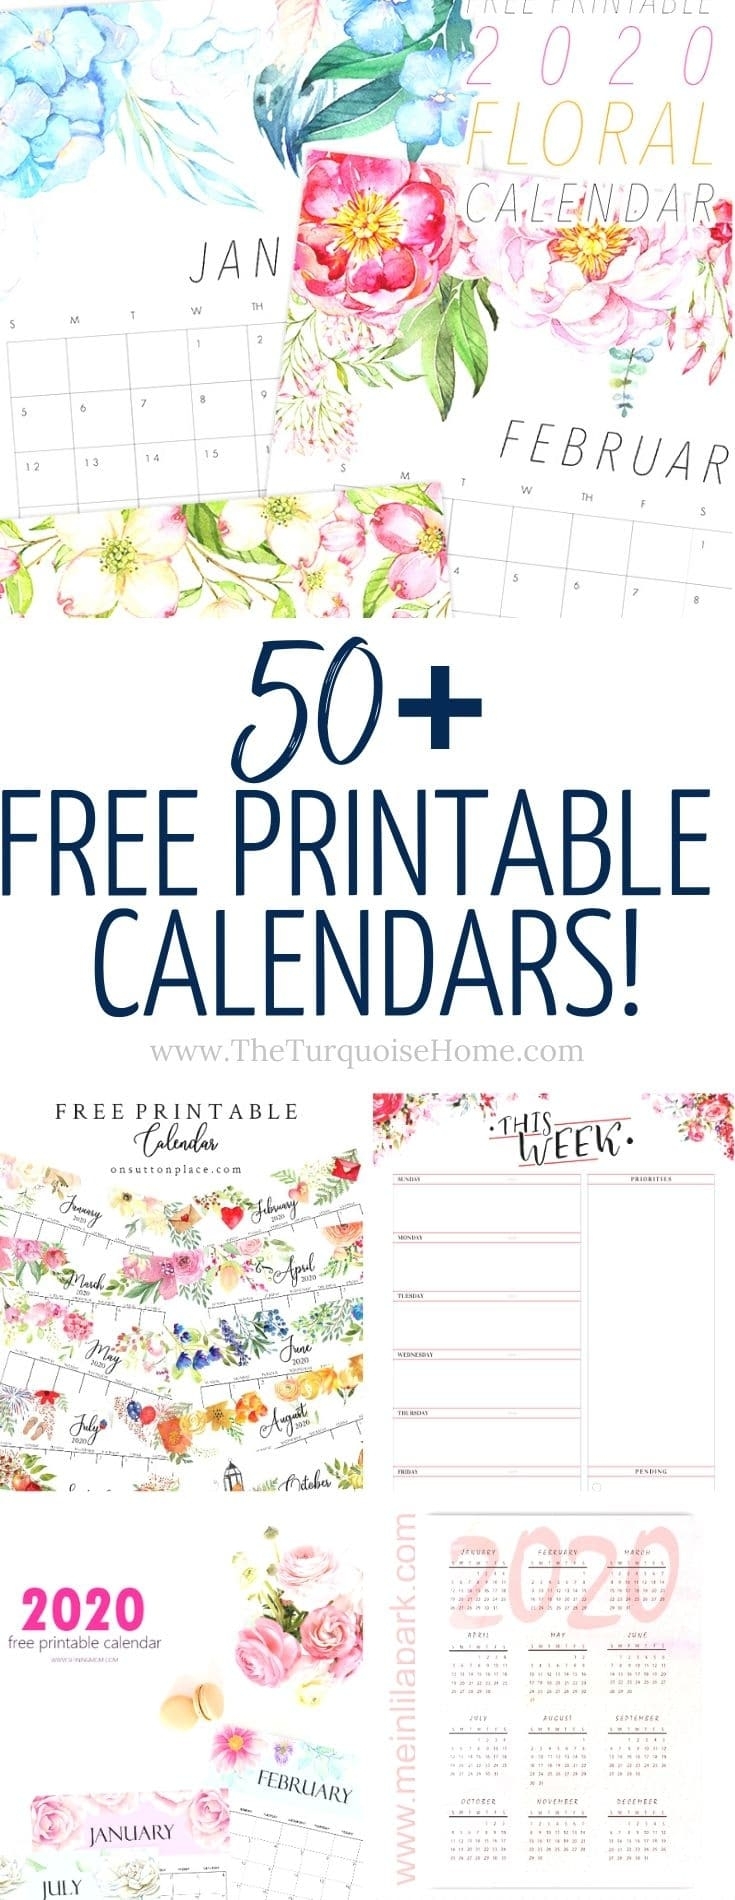 Collect Ree Printable Calendars That You Dont Have To Download